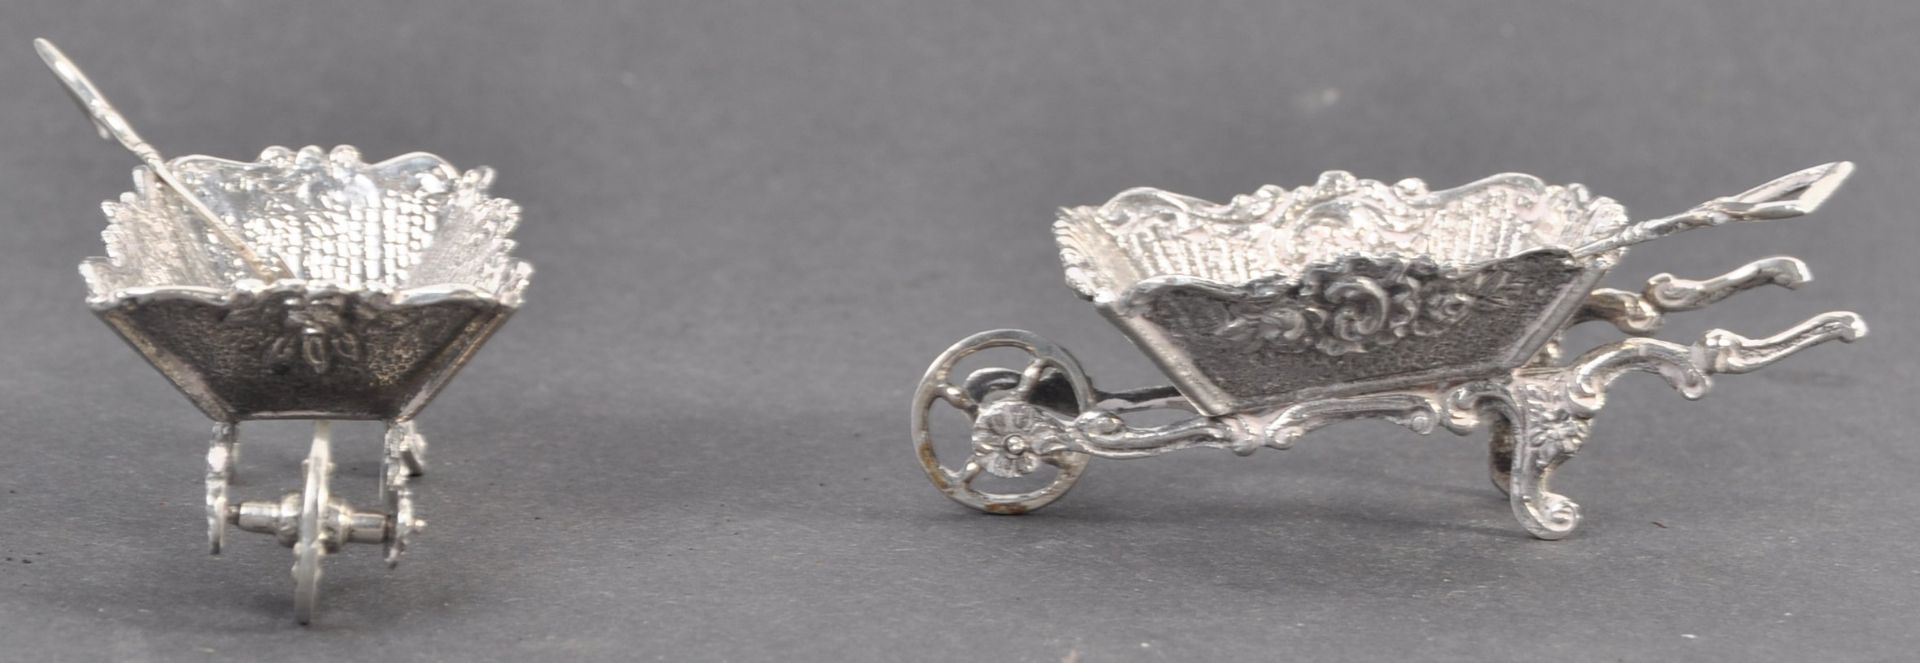 PAIR OF EDWARDIAN NOVELTY SILVER TABLE SALTS IN THE FORM OF WHEELBARROWS - Image 3 of 7